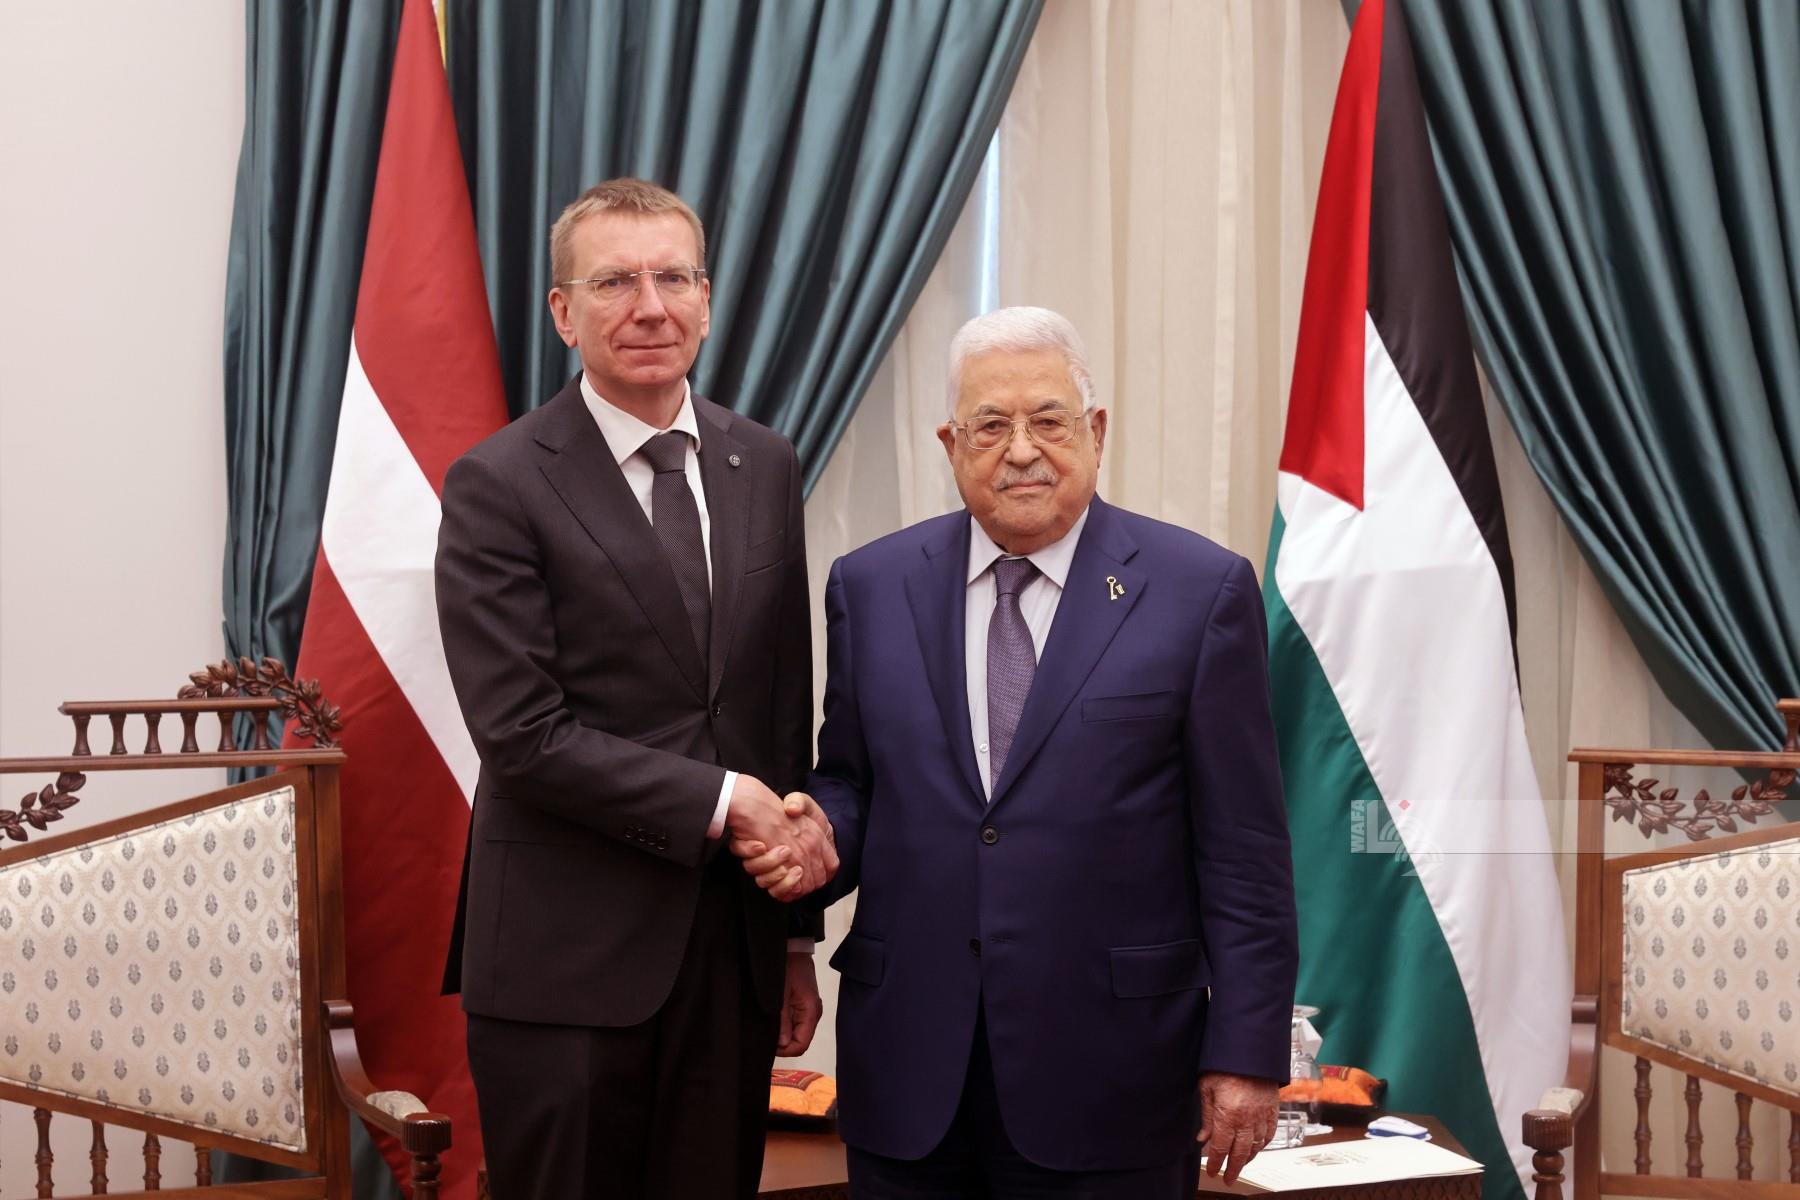 President Abbas meets his Latvian counterpart, briefs him on latest developments in Palestine